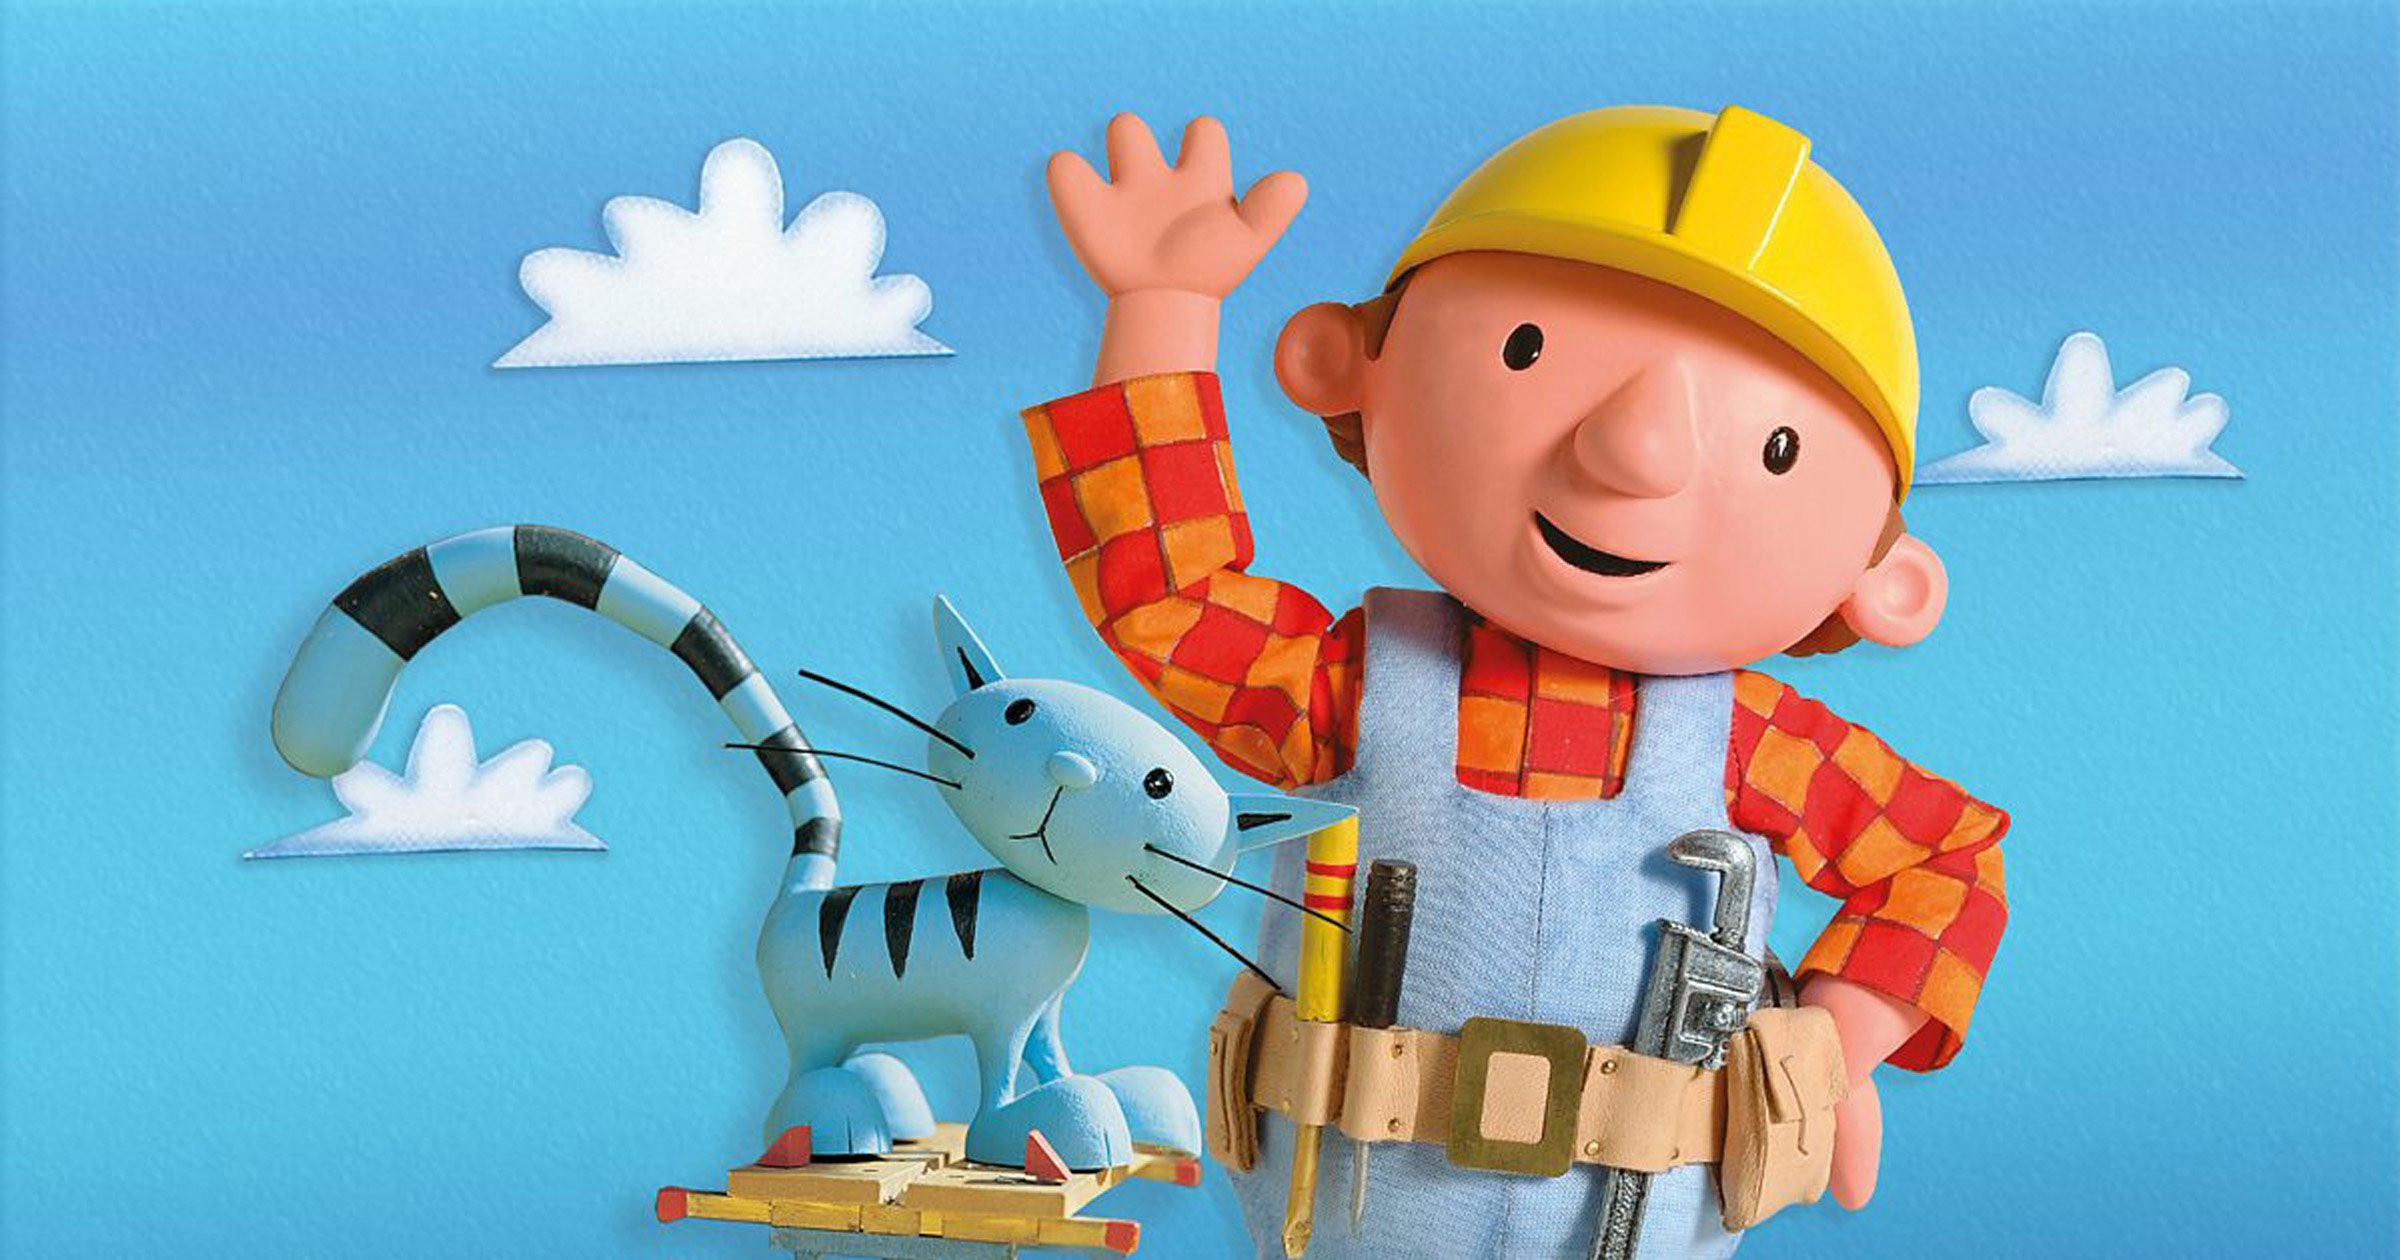 9. I know you were waiting to see the "Bob The Builder" opening s...